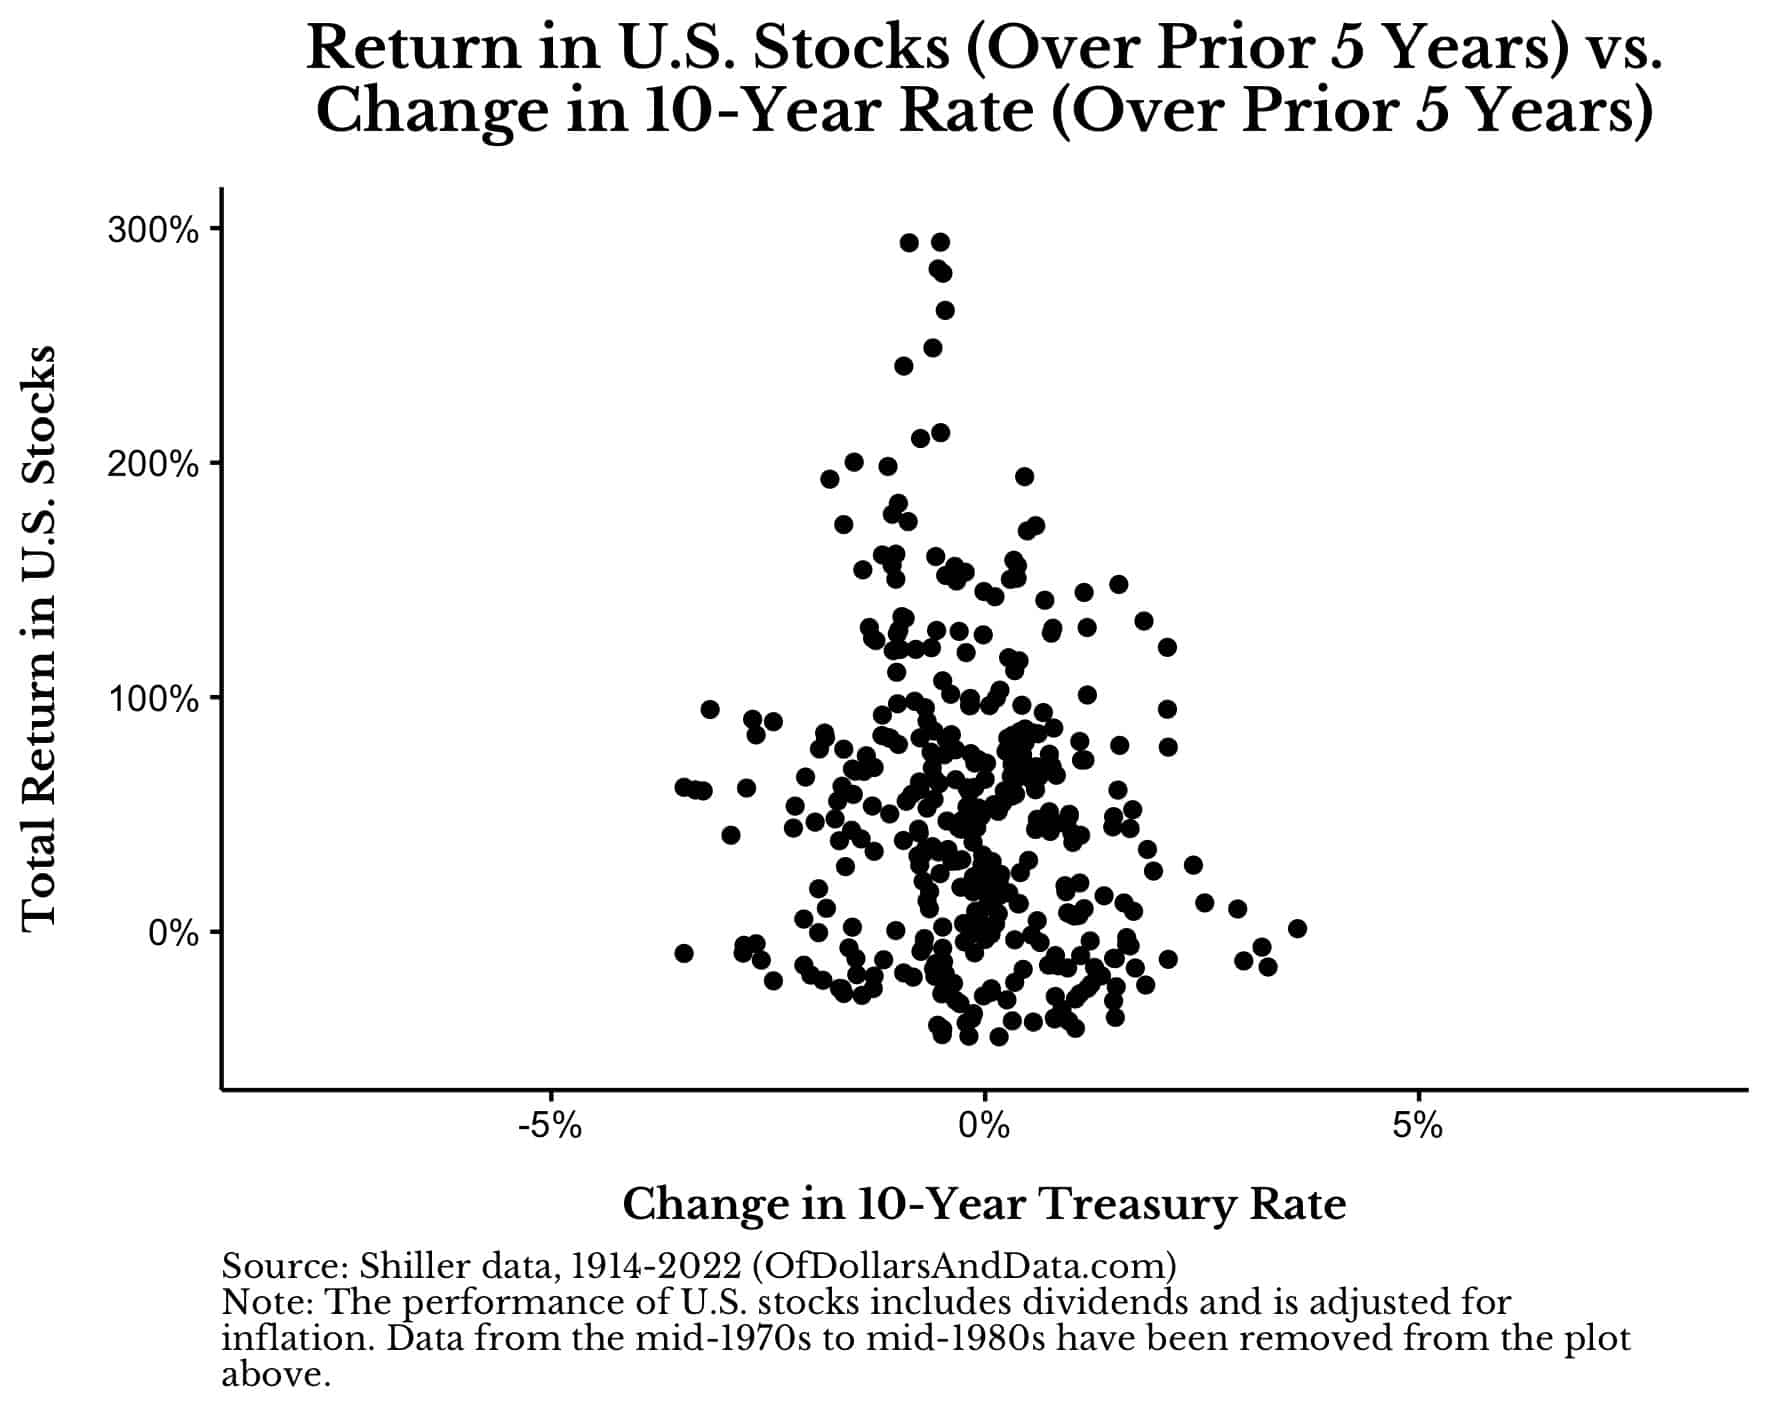 Return in US stocks over prior five years vs change in 10-year Treasury Rate over prior five years with the 1980s removed.